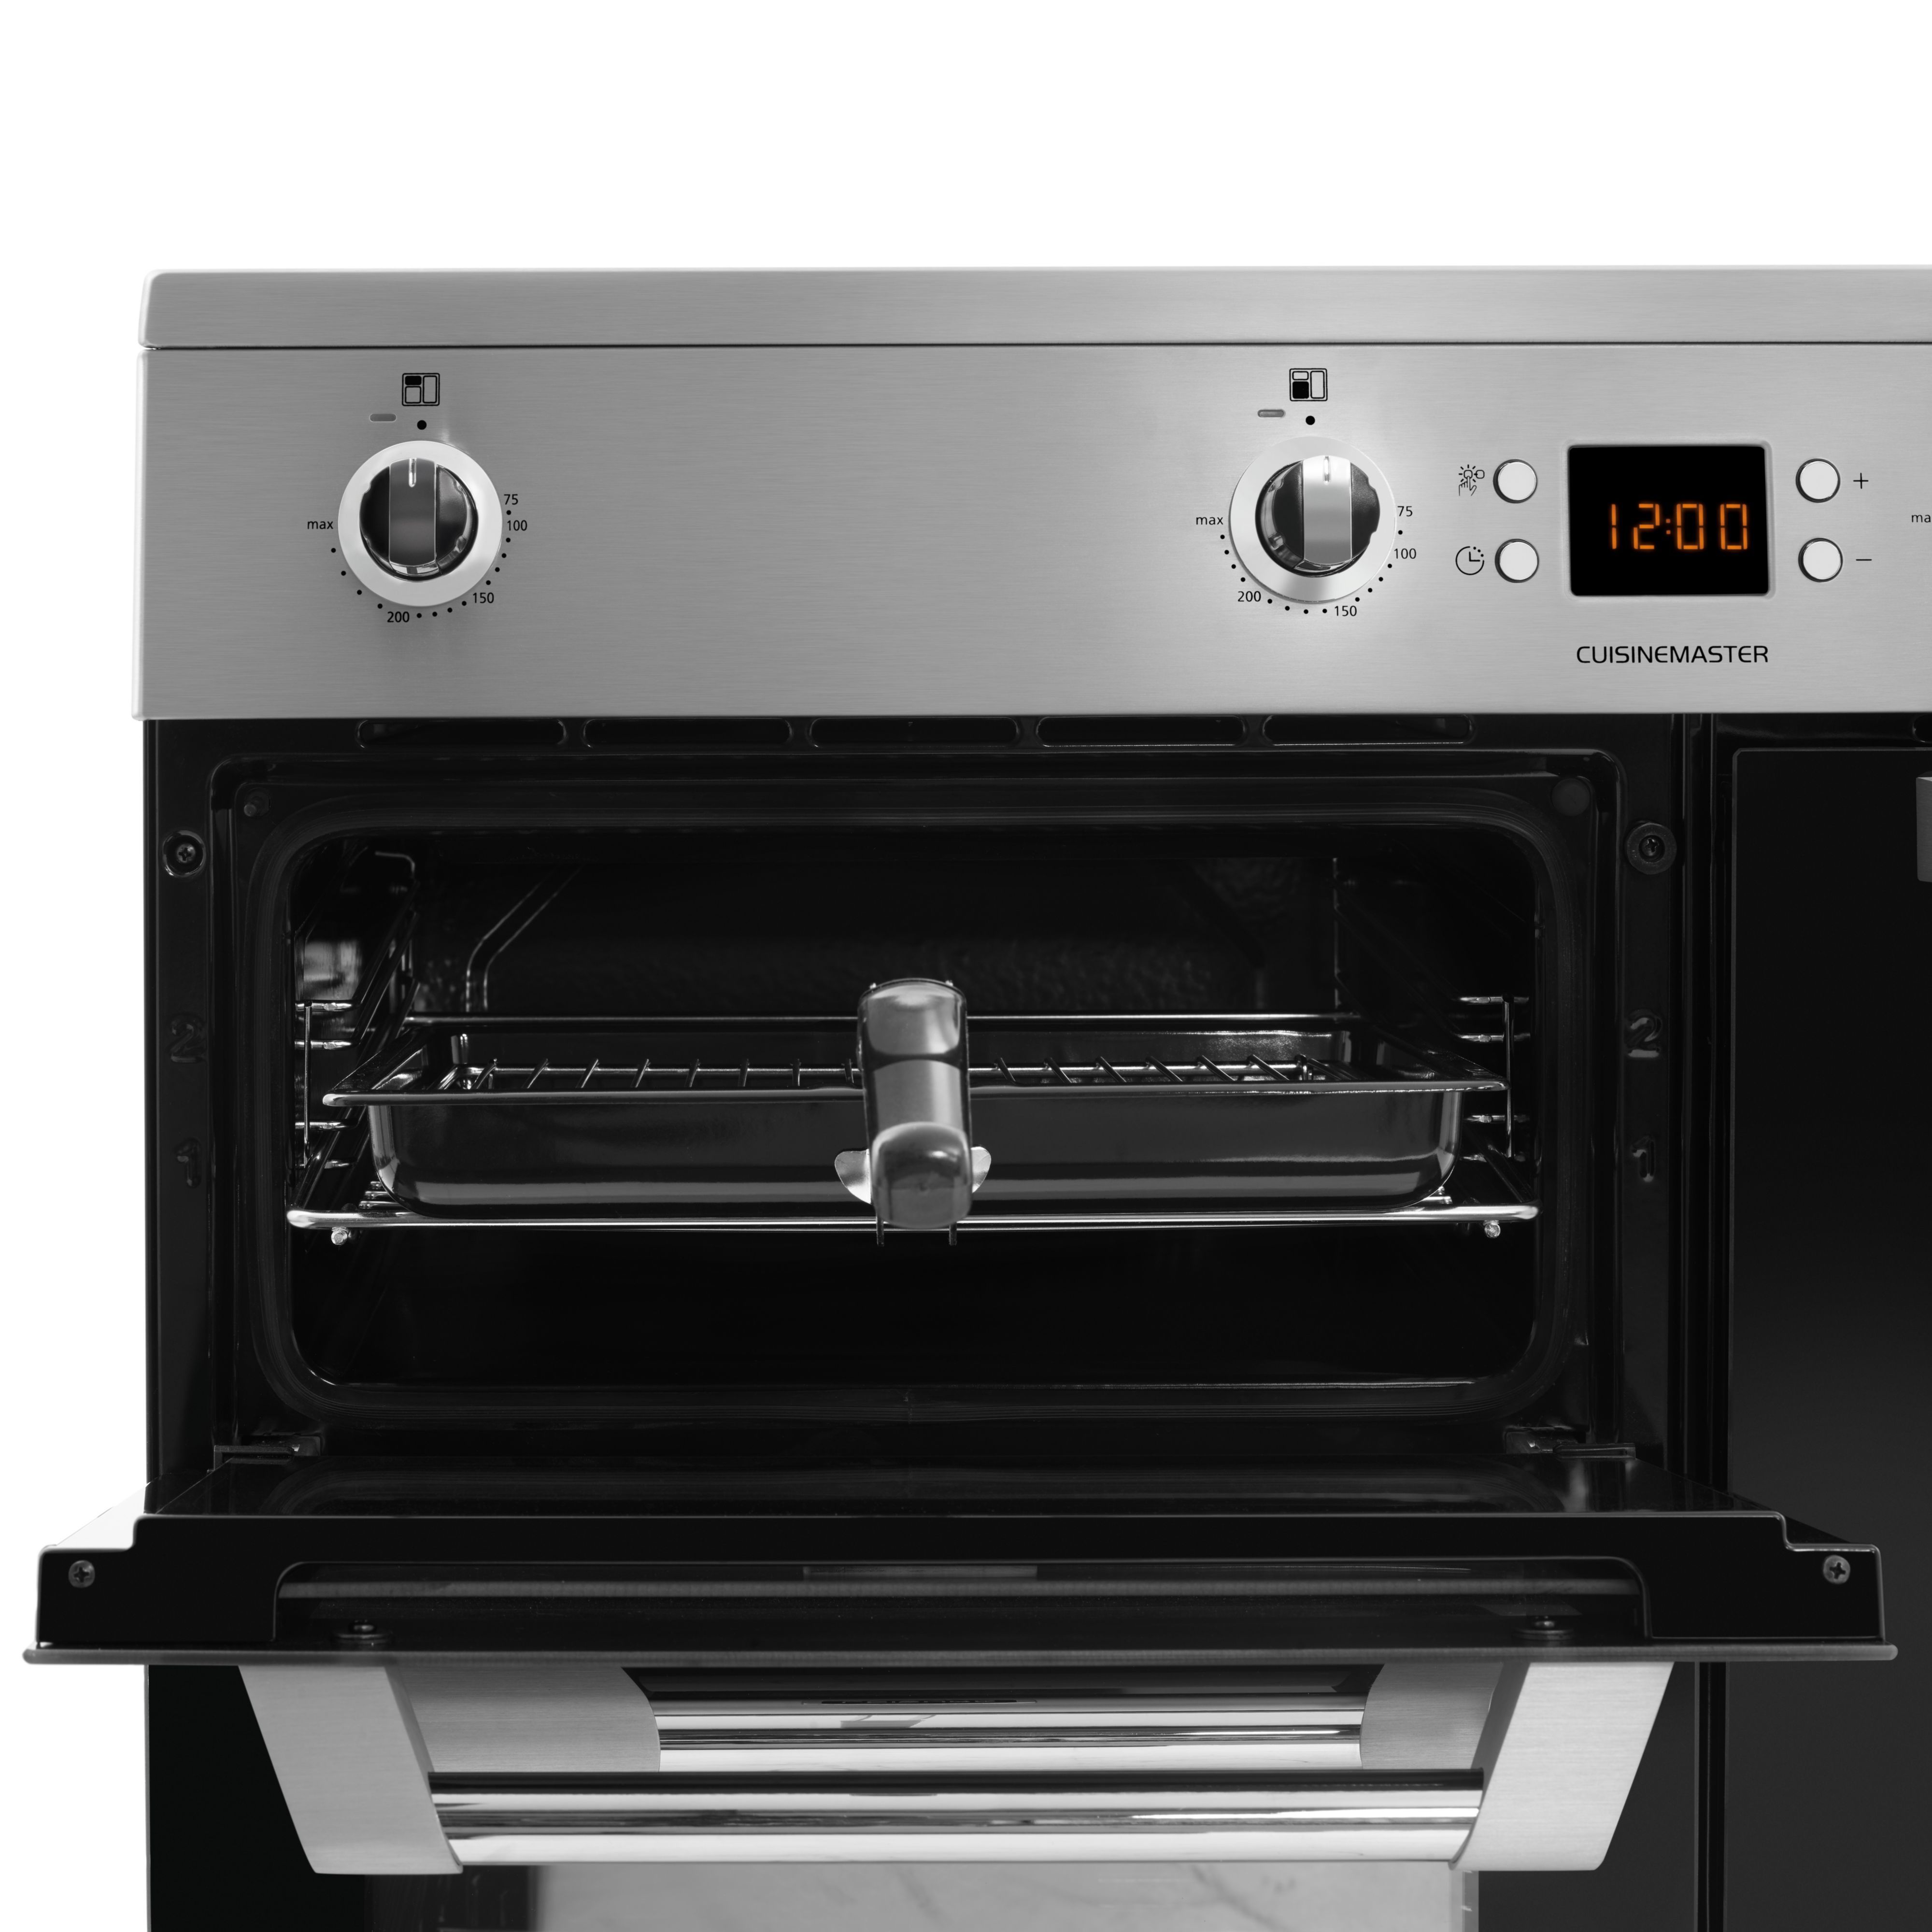 Leisure CS90D530X Freestanding Electric Range cooker with Induction Hob - Stainless steel effect